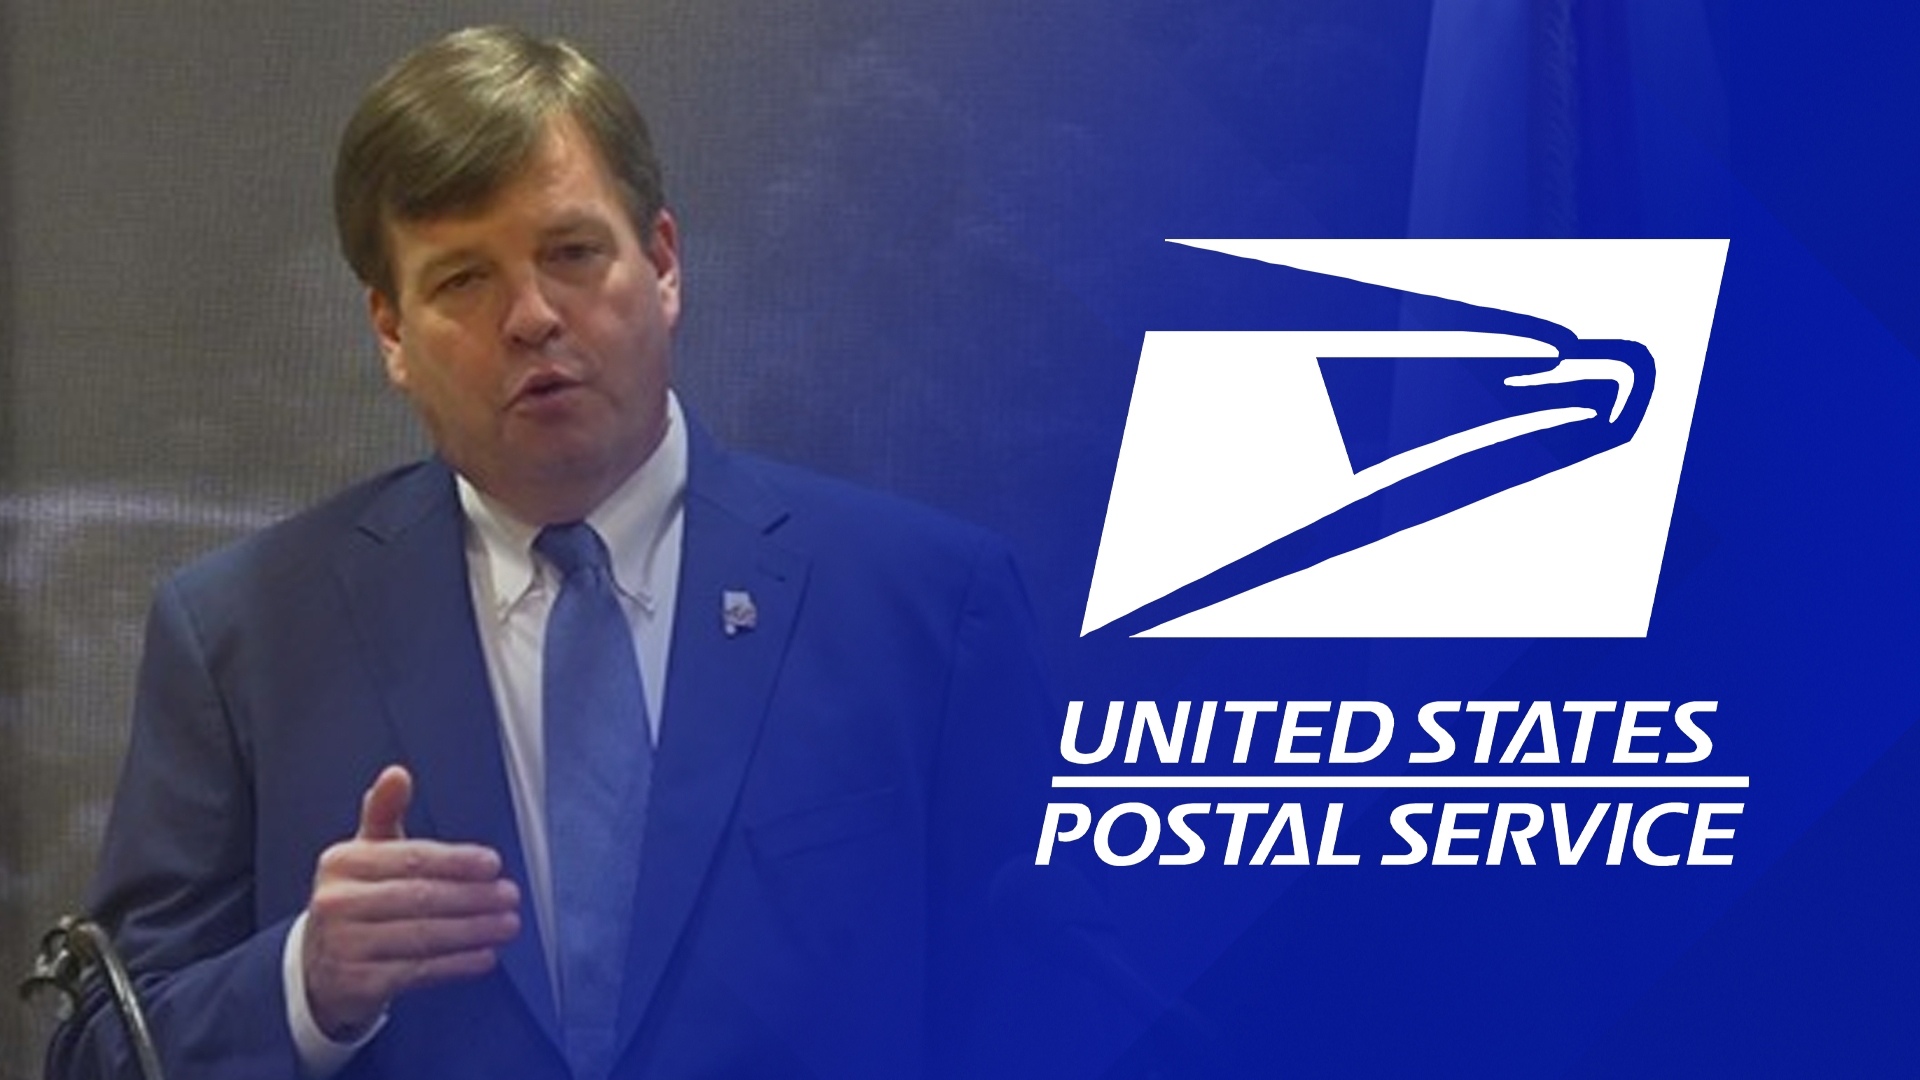 All Huntsville-area mail goes through a Birmingham facility which Strong says is causing delays and lost mail for many customers.